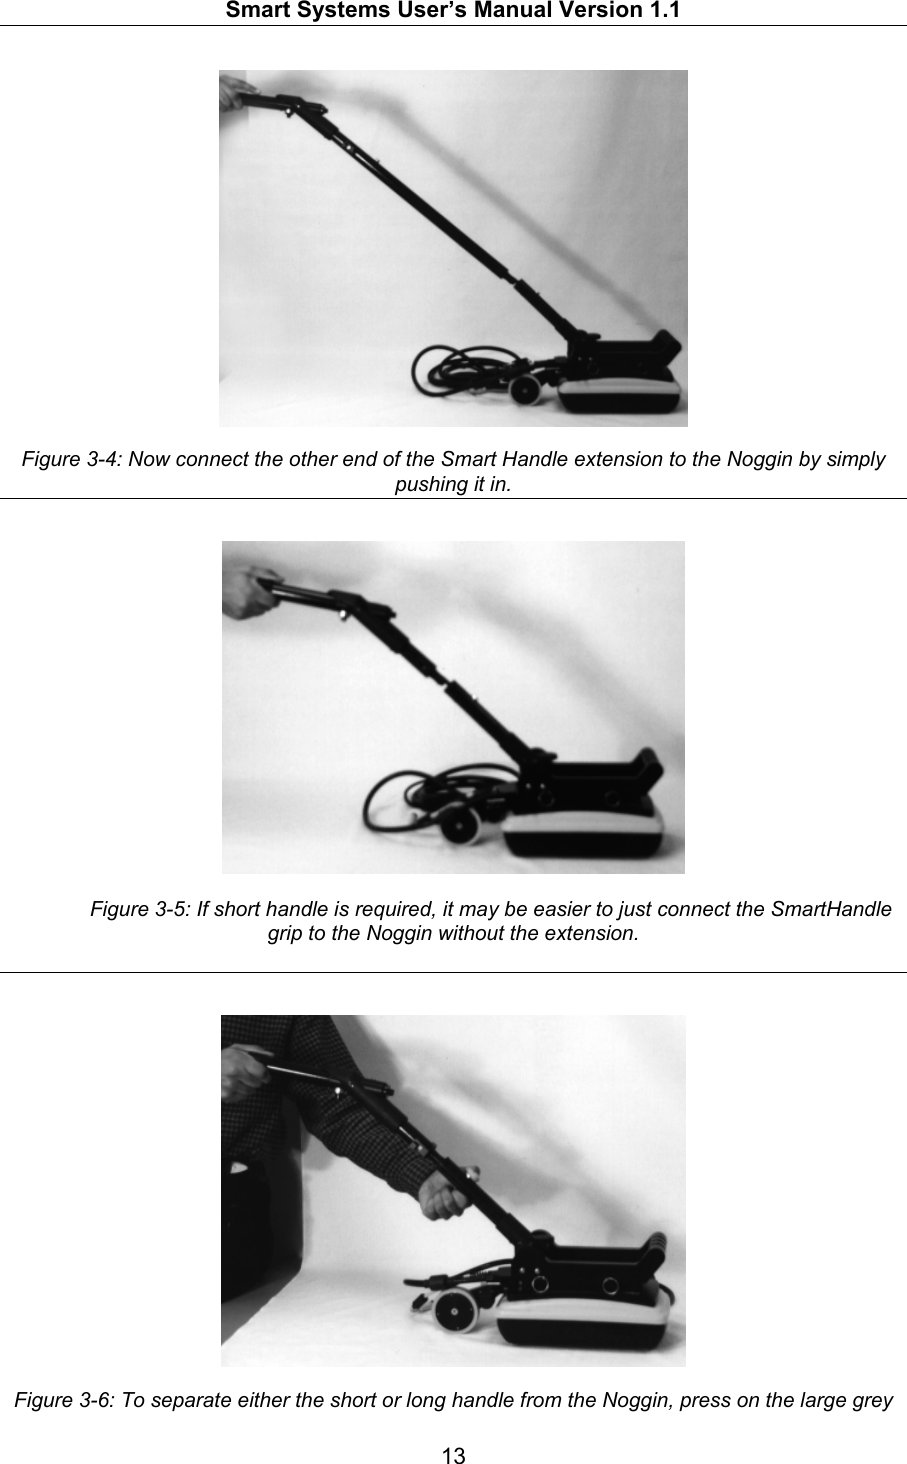   Smart Systems User’s Manual Version 1.1  13    Figure 3-4: Now connect the other end of the Smart Handle extension to the Noggin by simply pushing it in.      Figure 3-5: If short handle is required, it may be easier to just connect the SmartHandle grip to the Noggin without the extension.      Figure 3-6: To separate either the short or long handle from the Noggin, press on the large grey 